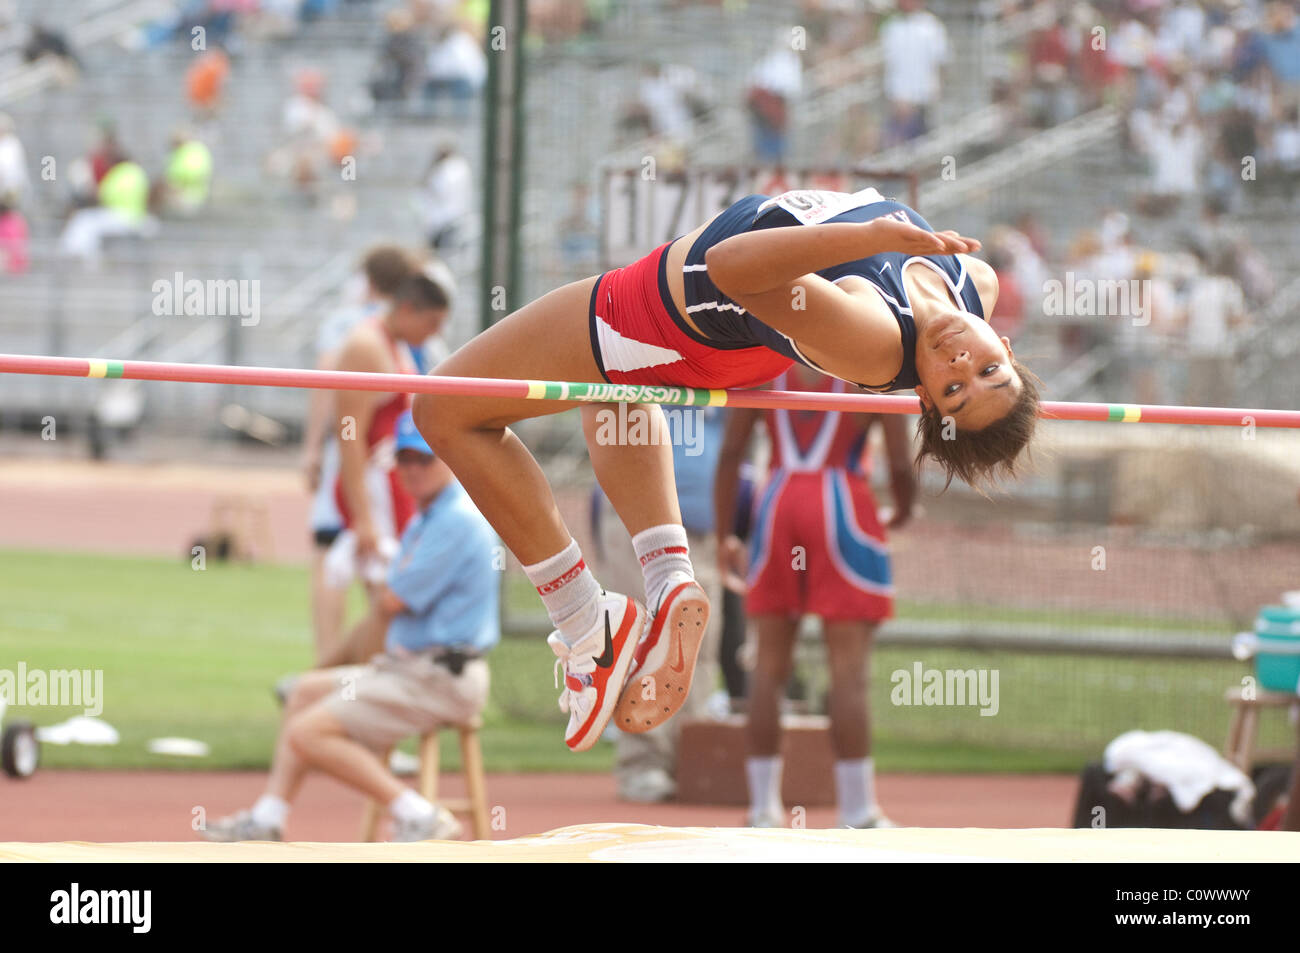 Female high jumper competes at the Texas state UIL high school state track meet at the University of Texas at Austin. Stock Photo